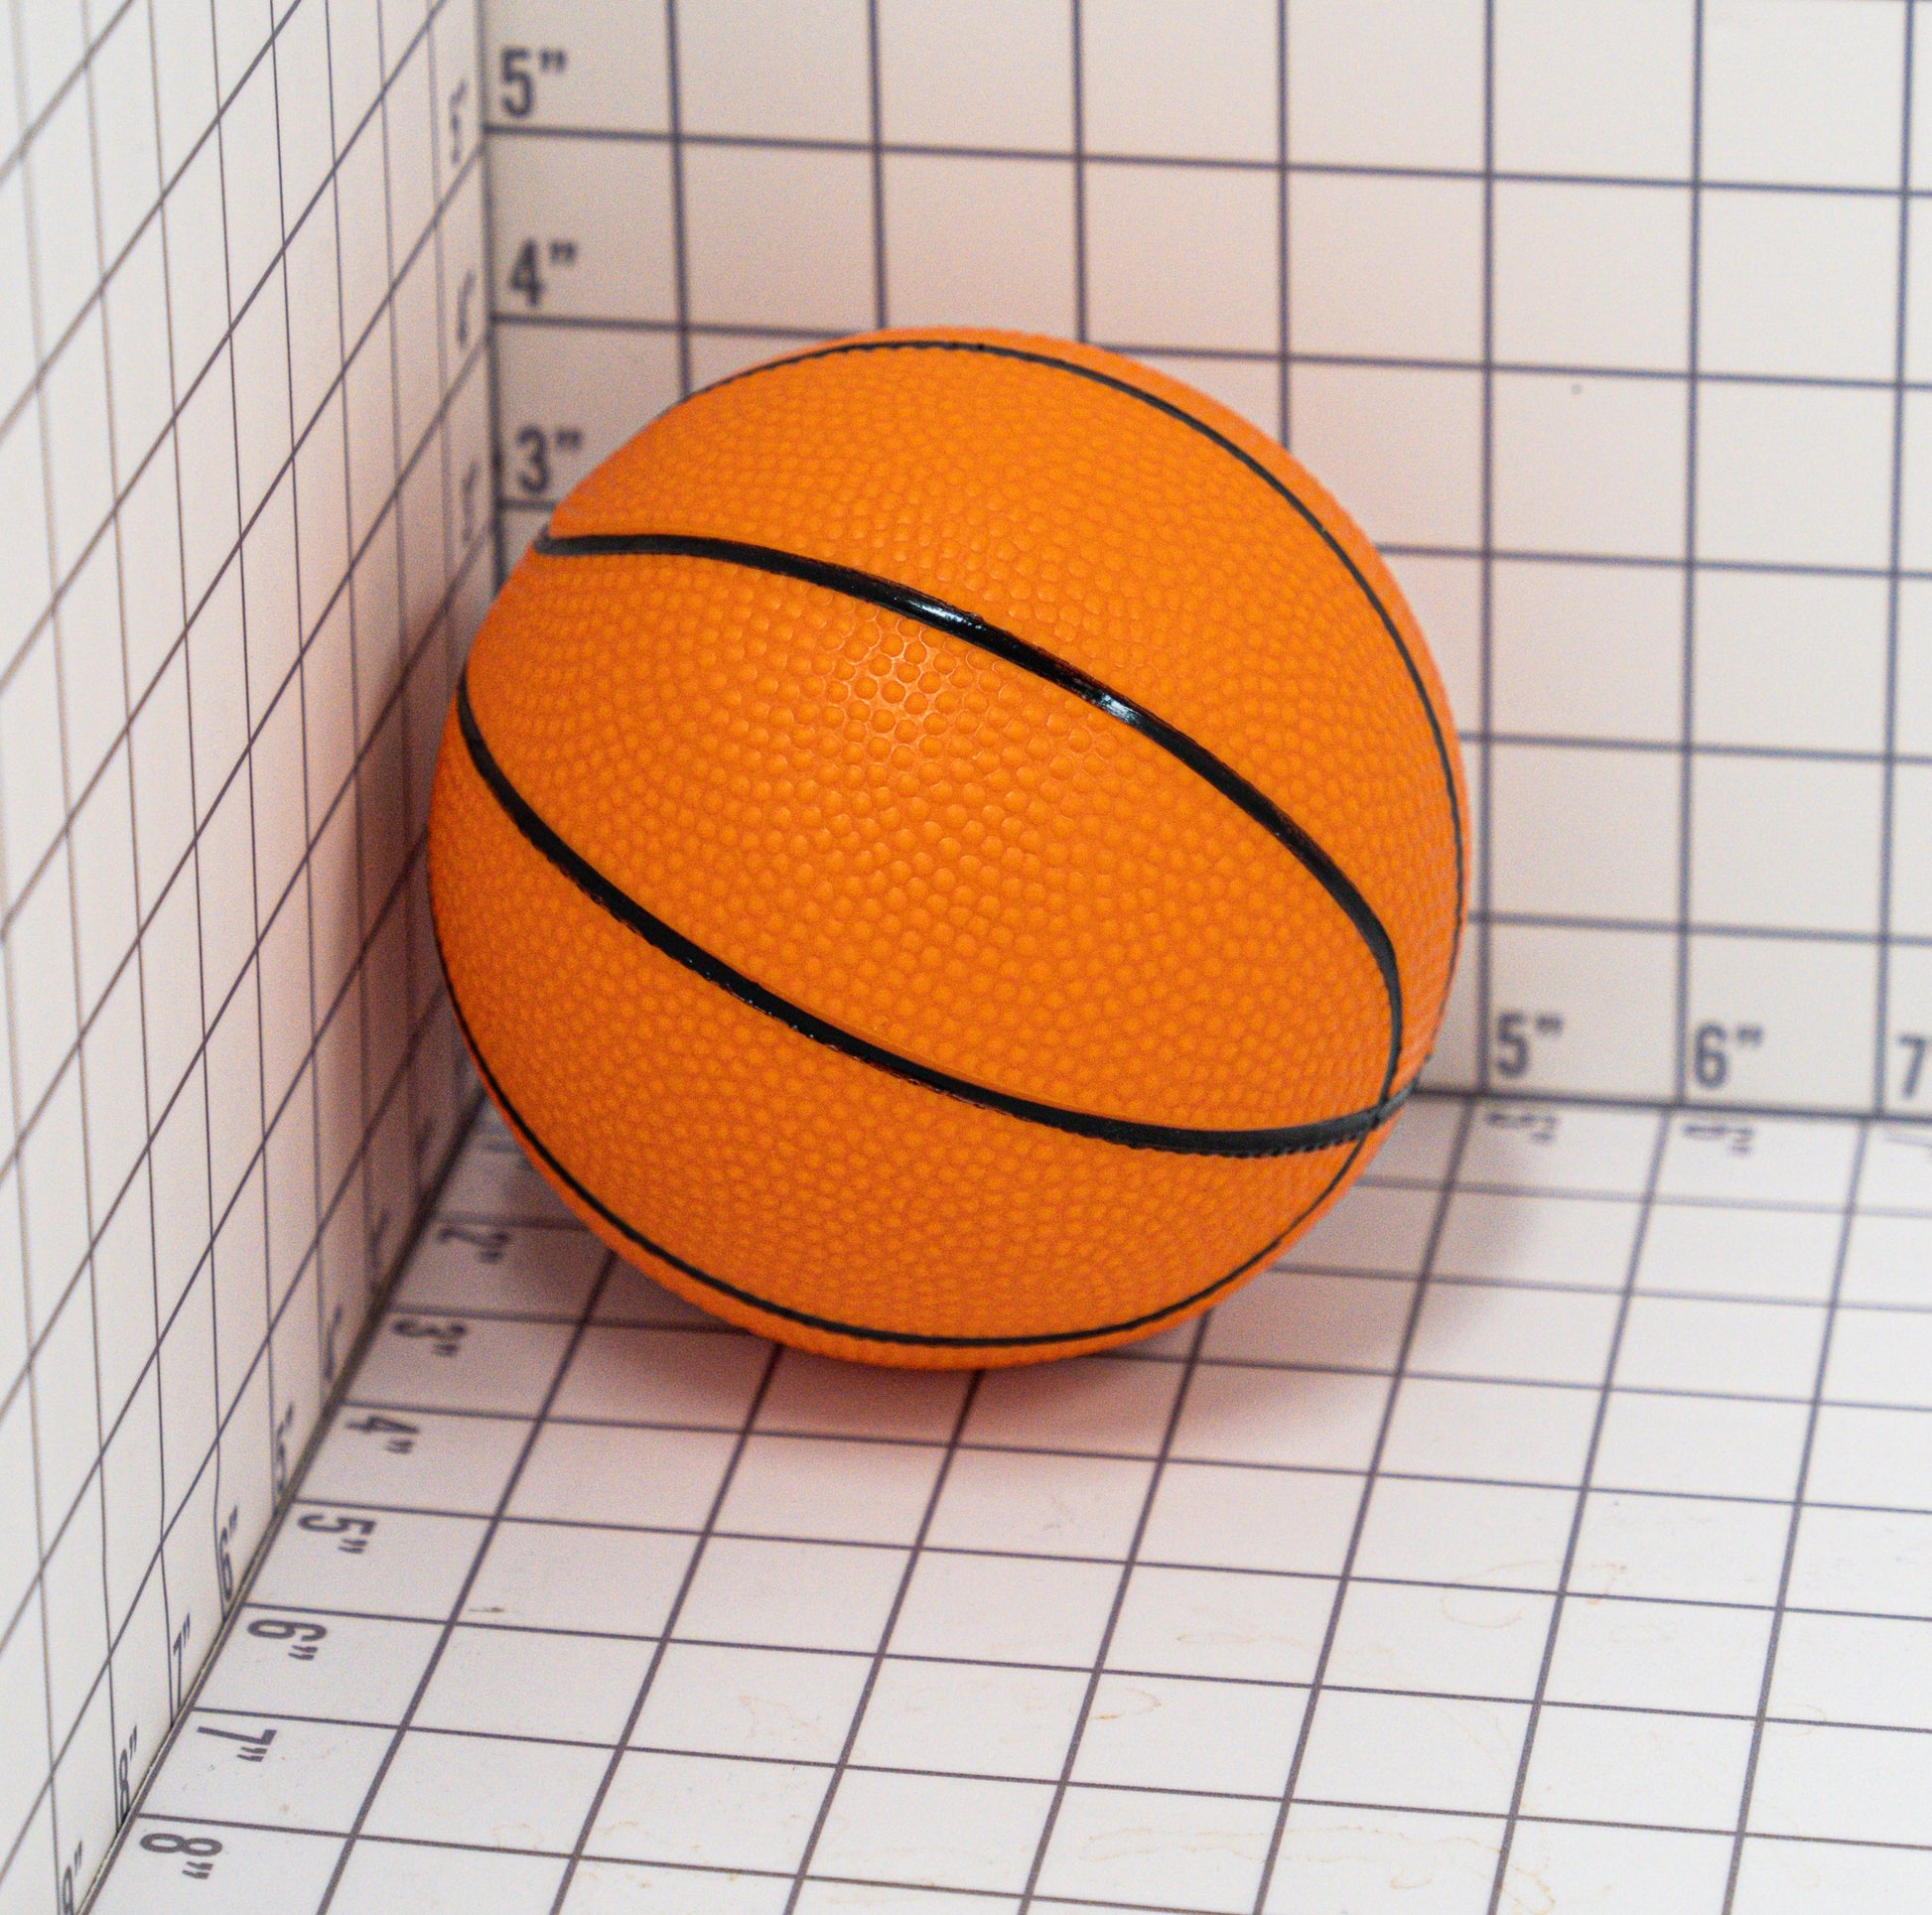 BASKETBALL 5" RUBBER (HP/MD) [HP3001] for ICE game(s)